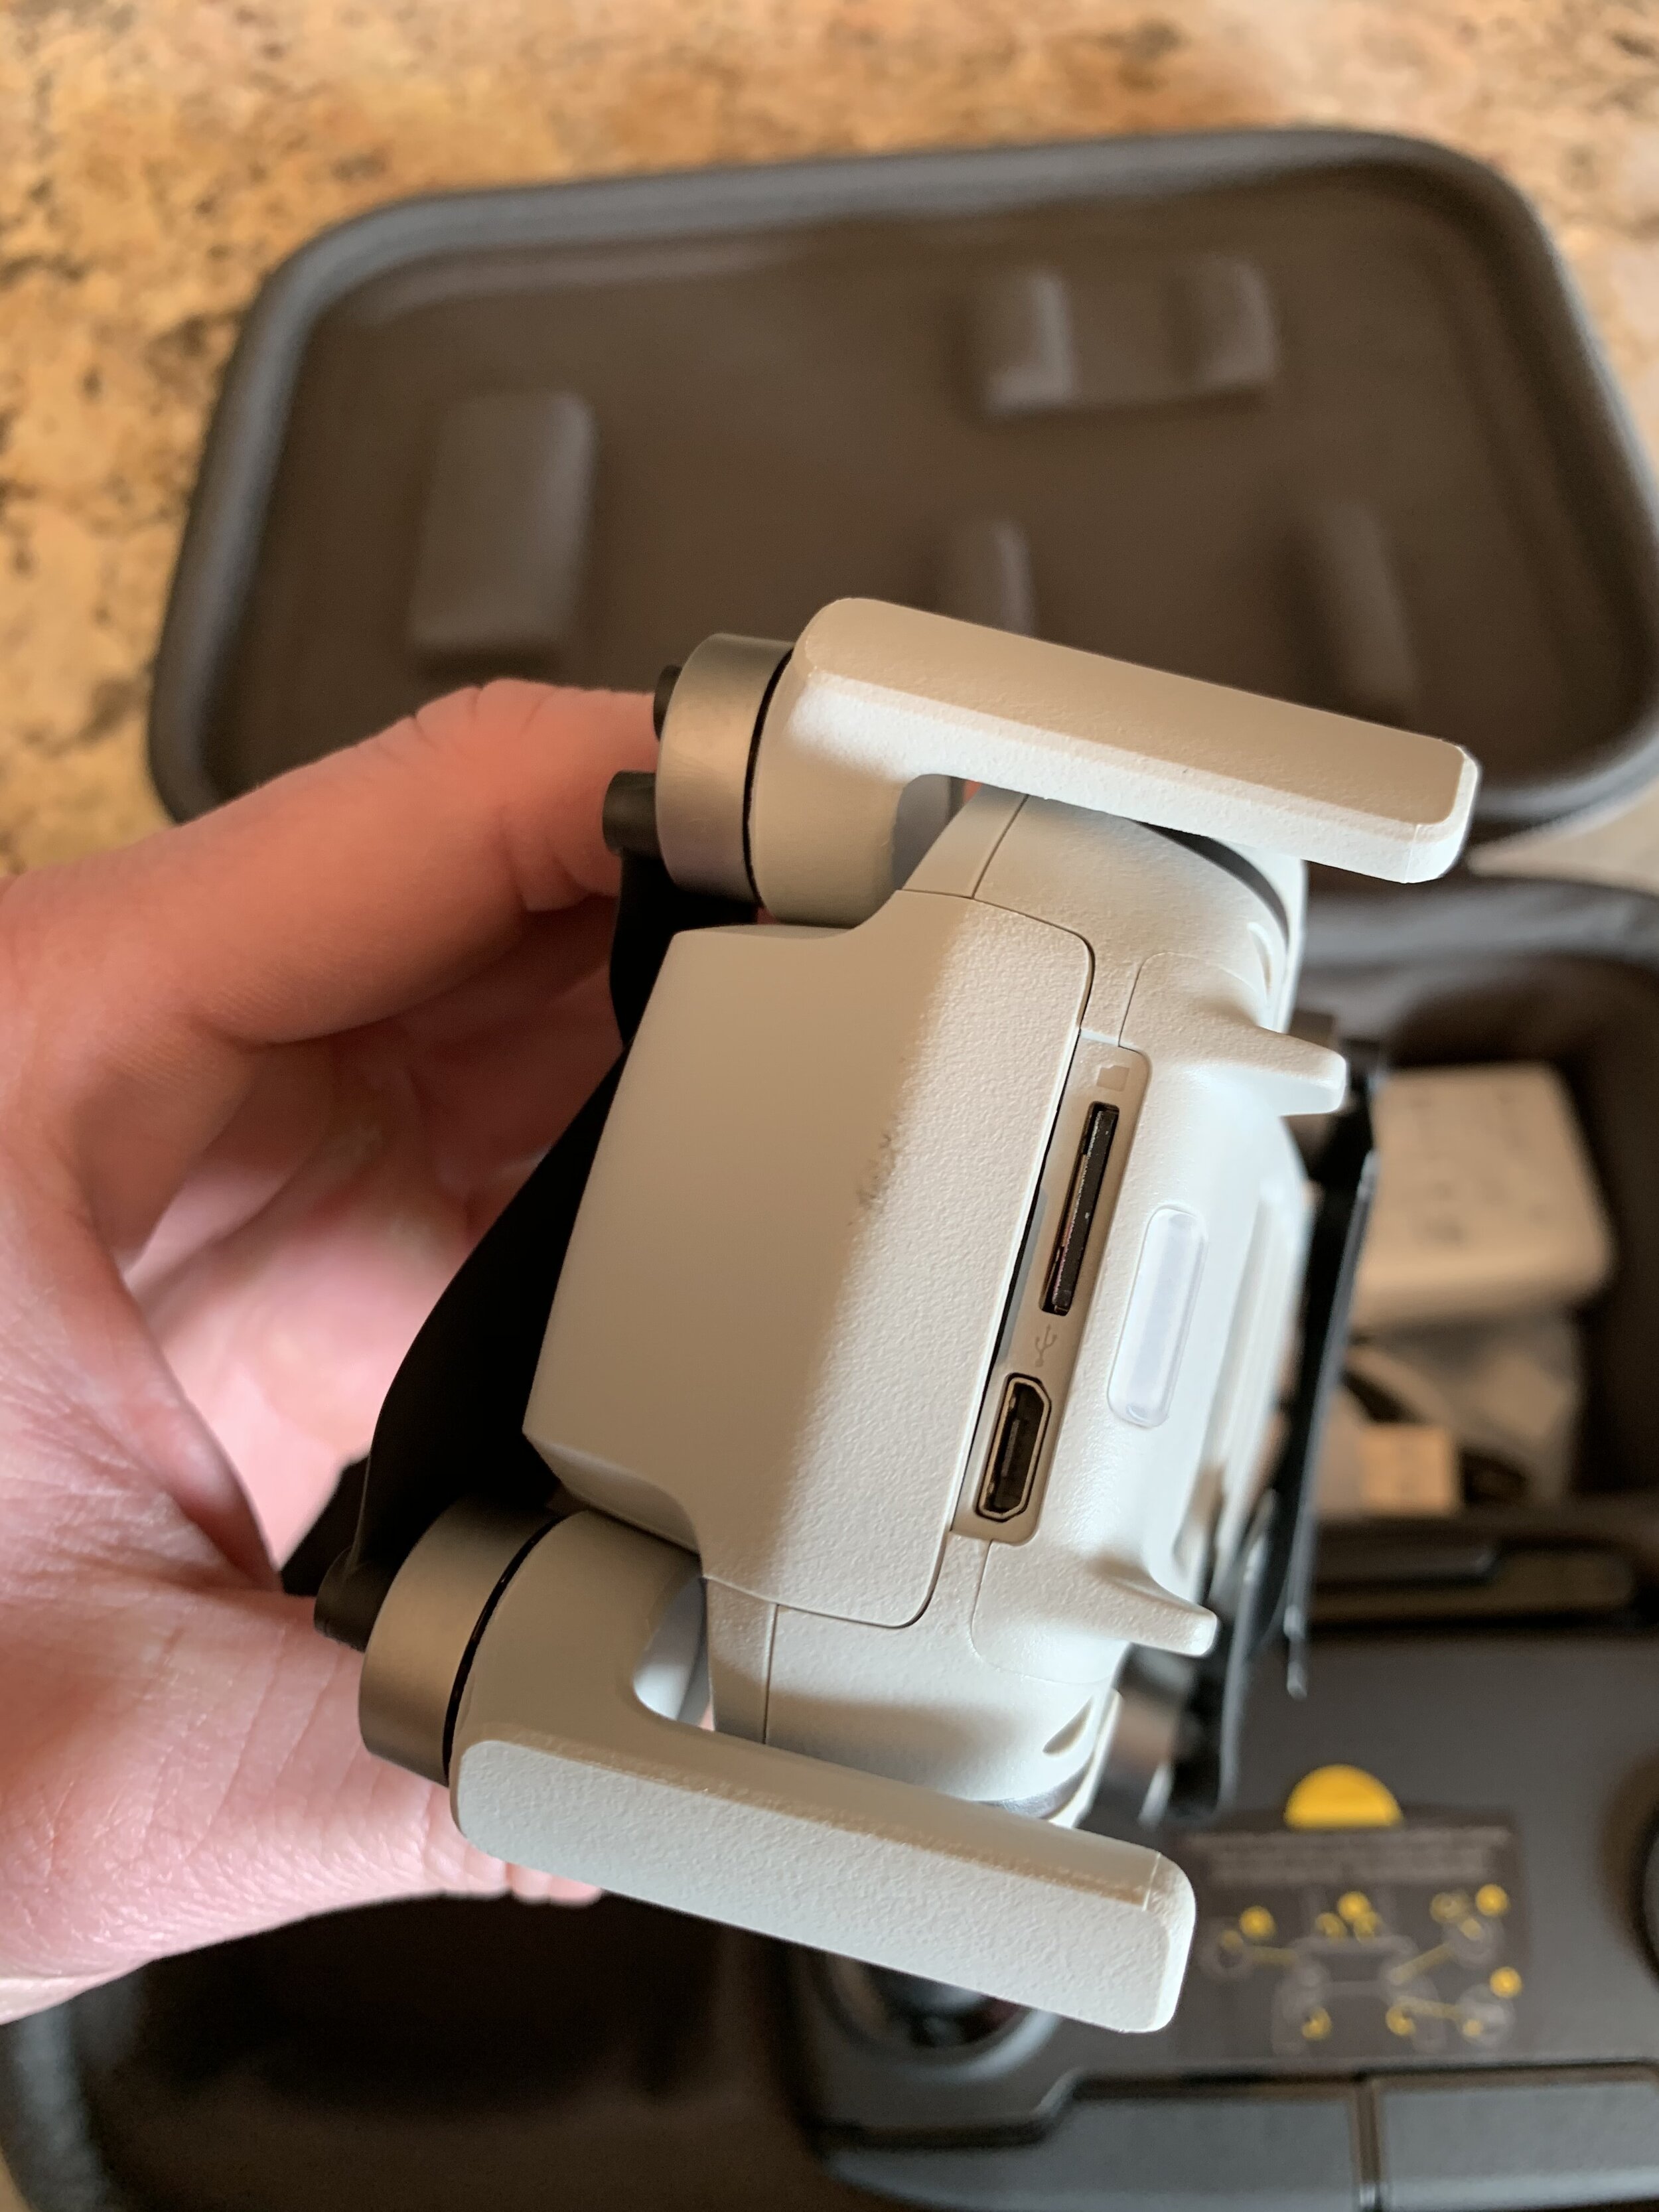 Mavic Pro Battery Won't Charge: Here's How to Fix It – Droneblog